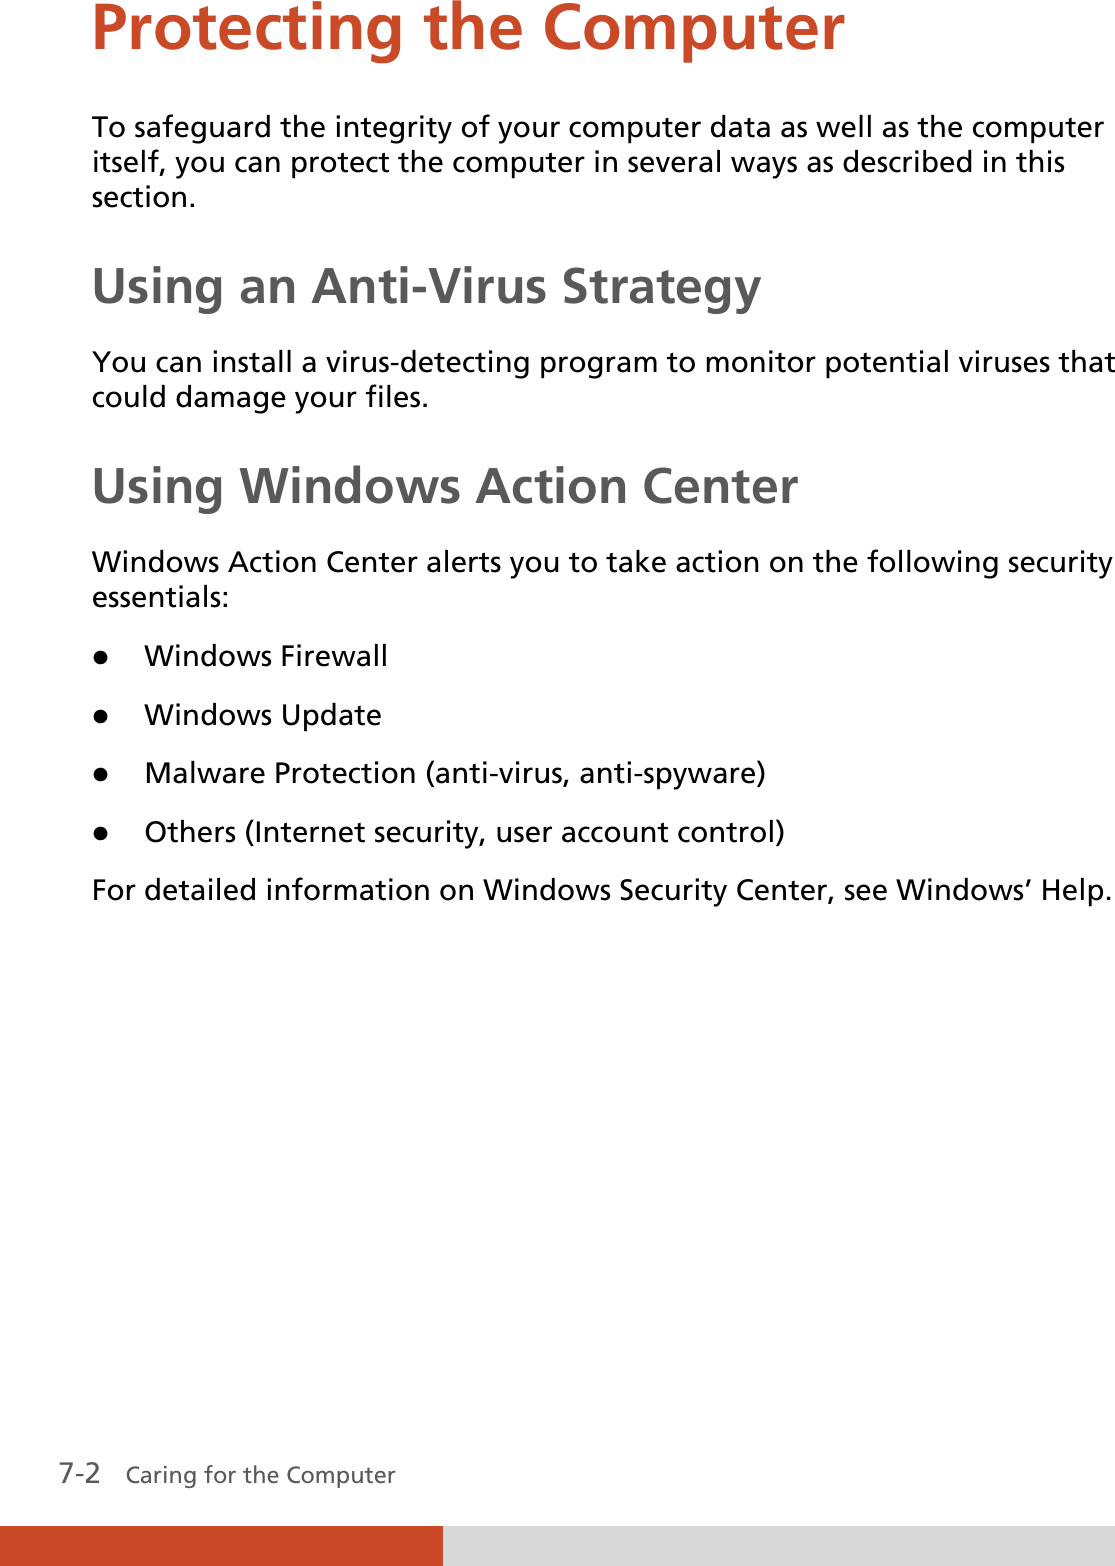  7-2   Caring for the Computer Protecting the Computer To safeguard the integrity of your computer data as well as the computer itself, you can protect the computer in several ways as described in this section. Using an Anti-Virus Strategy You can install a virus-detecting program to monitor potential viruses that could damage your files. Using Windows Action Center Windows Action Center alerts you to take action on the following security essentials: z Windows Firewall z Windows Update z Malware Protection (anti-virus, anti-spyware) z Others (Internet security, user account control) For detailed information on Windows Security Center, see Windows’ Help.      